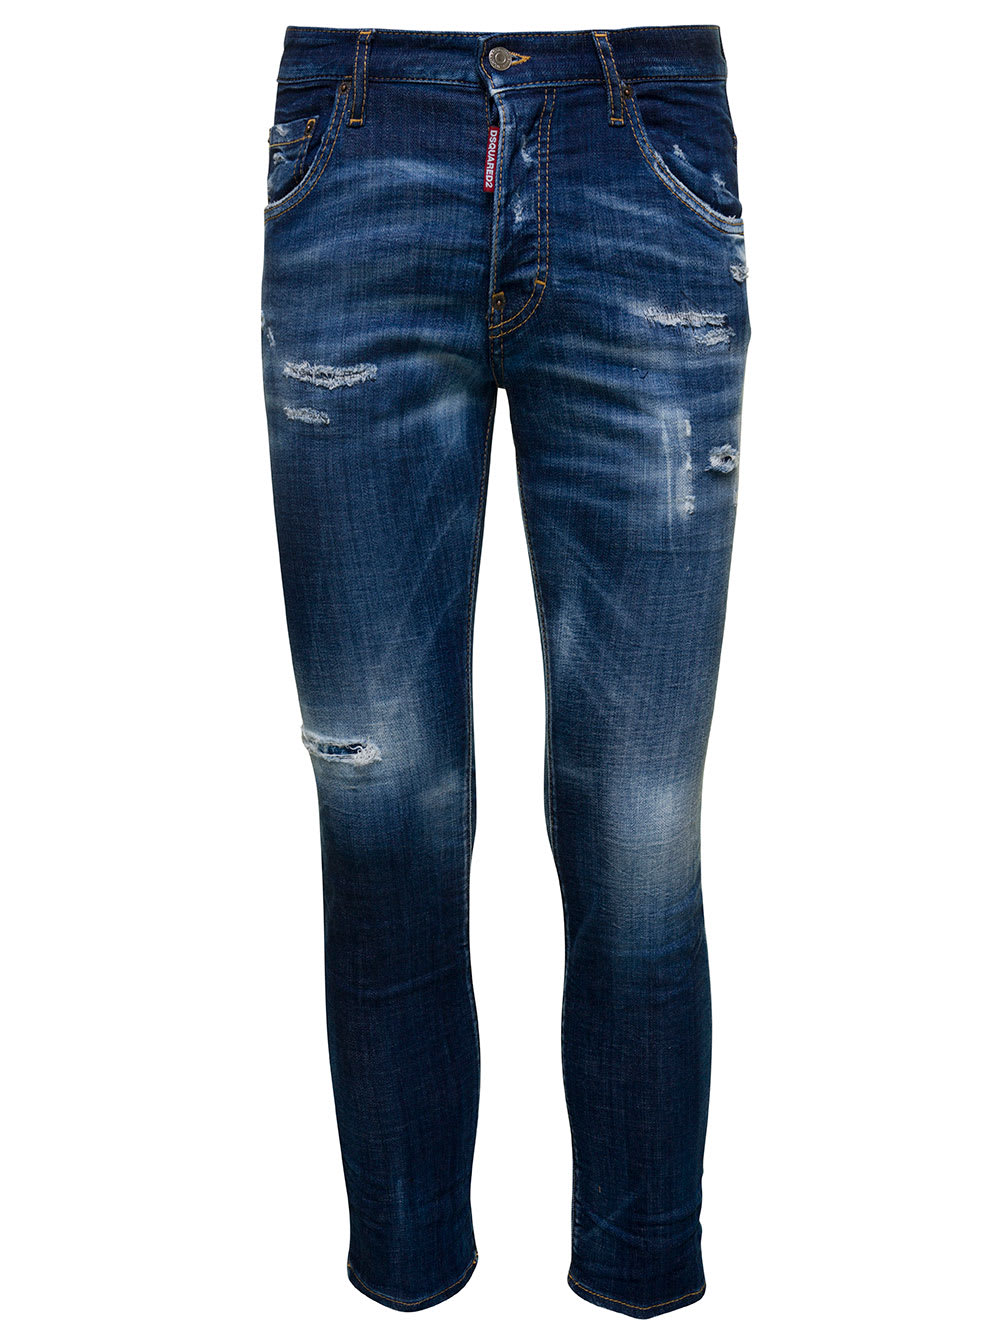 Dsquared2 'skater' Blue Jeans With Effect And Rips In Stretch Cotton Denim Man | italist, ALWAYS LIKE A SALE